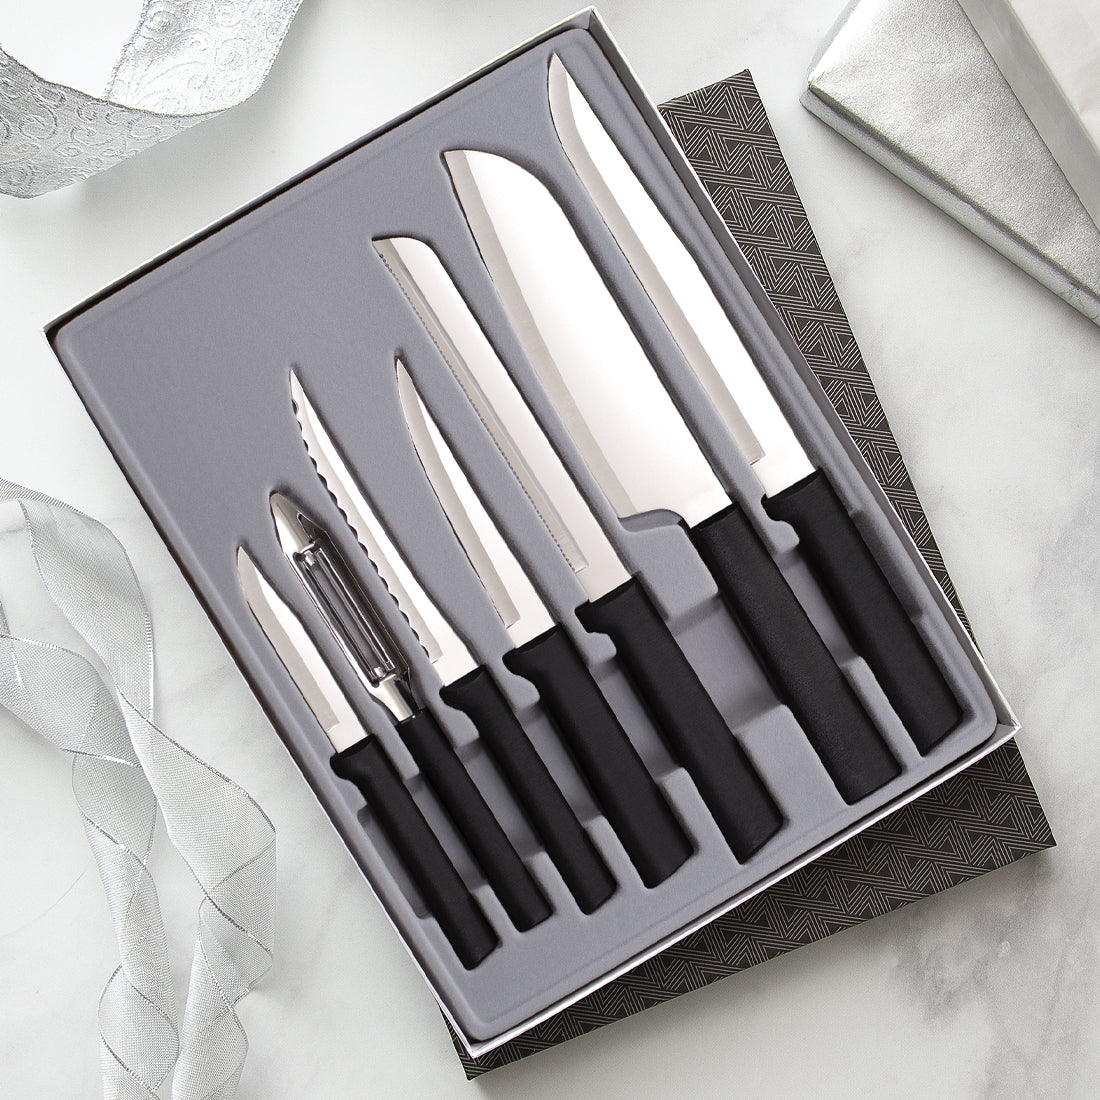 Sale: Ultimate Utensil Gift Box Set by Rada Cutlery Made in USA